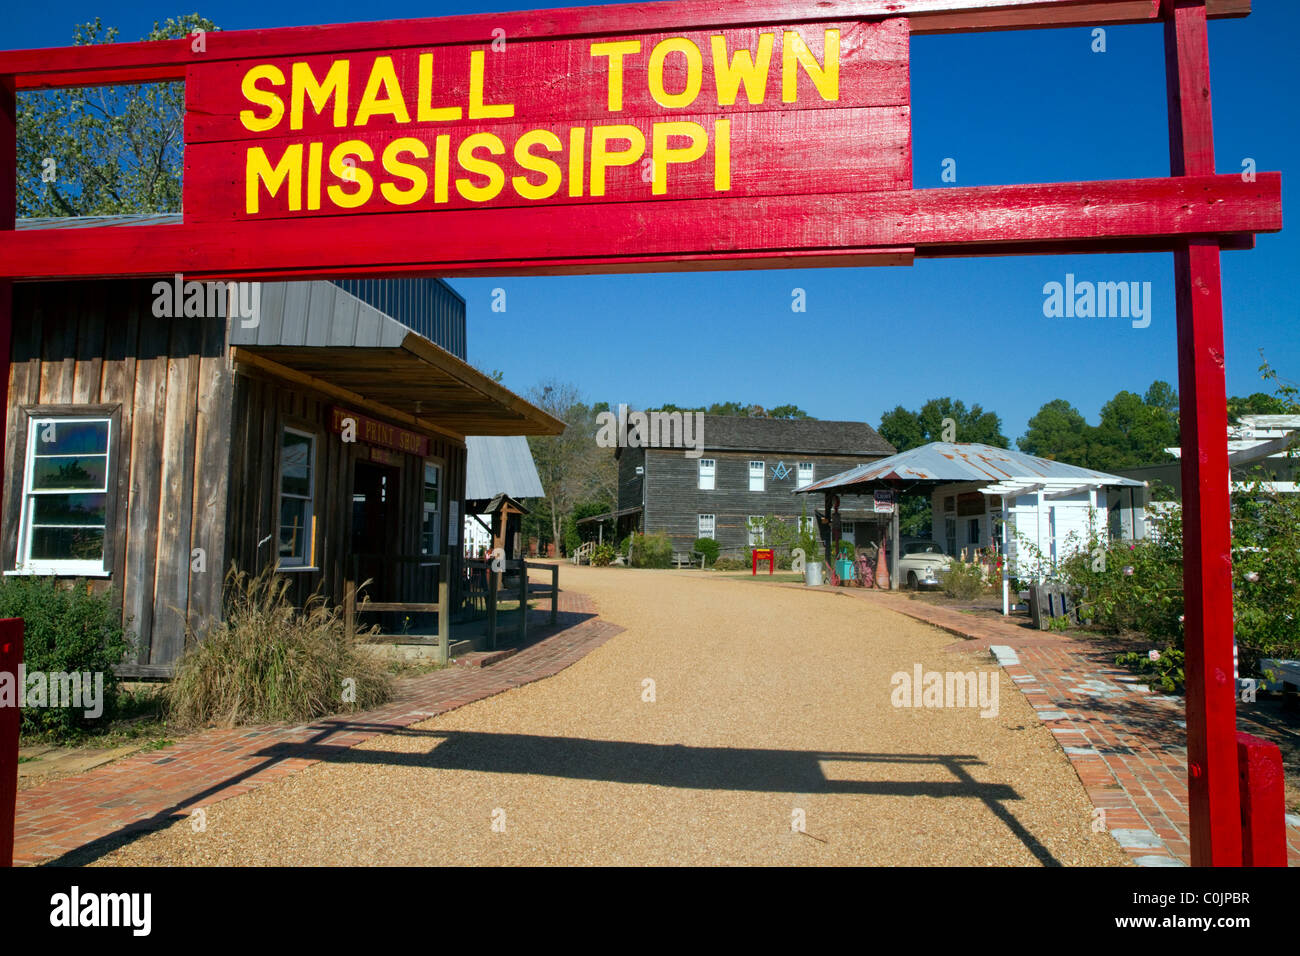 Small Town Mississippi is a feature of the Mississippi Agriculture and Forestry Museum located in Jackson, Mississippi, USA. Stock Photo